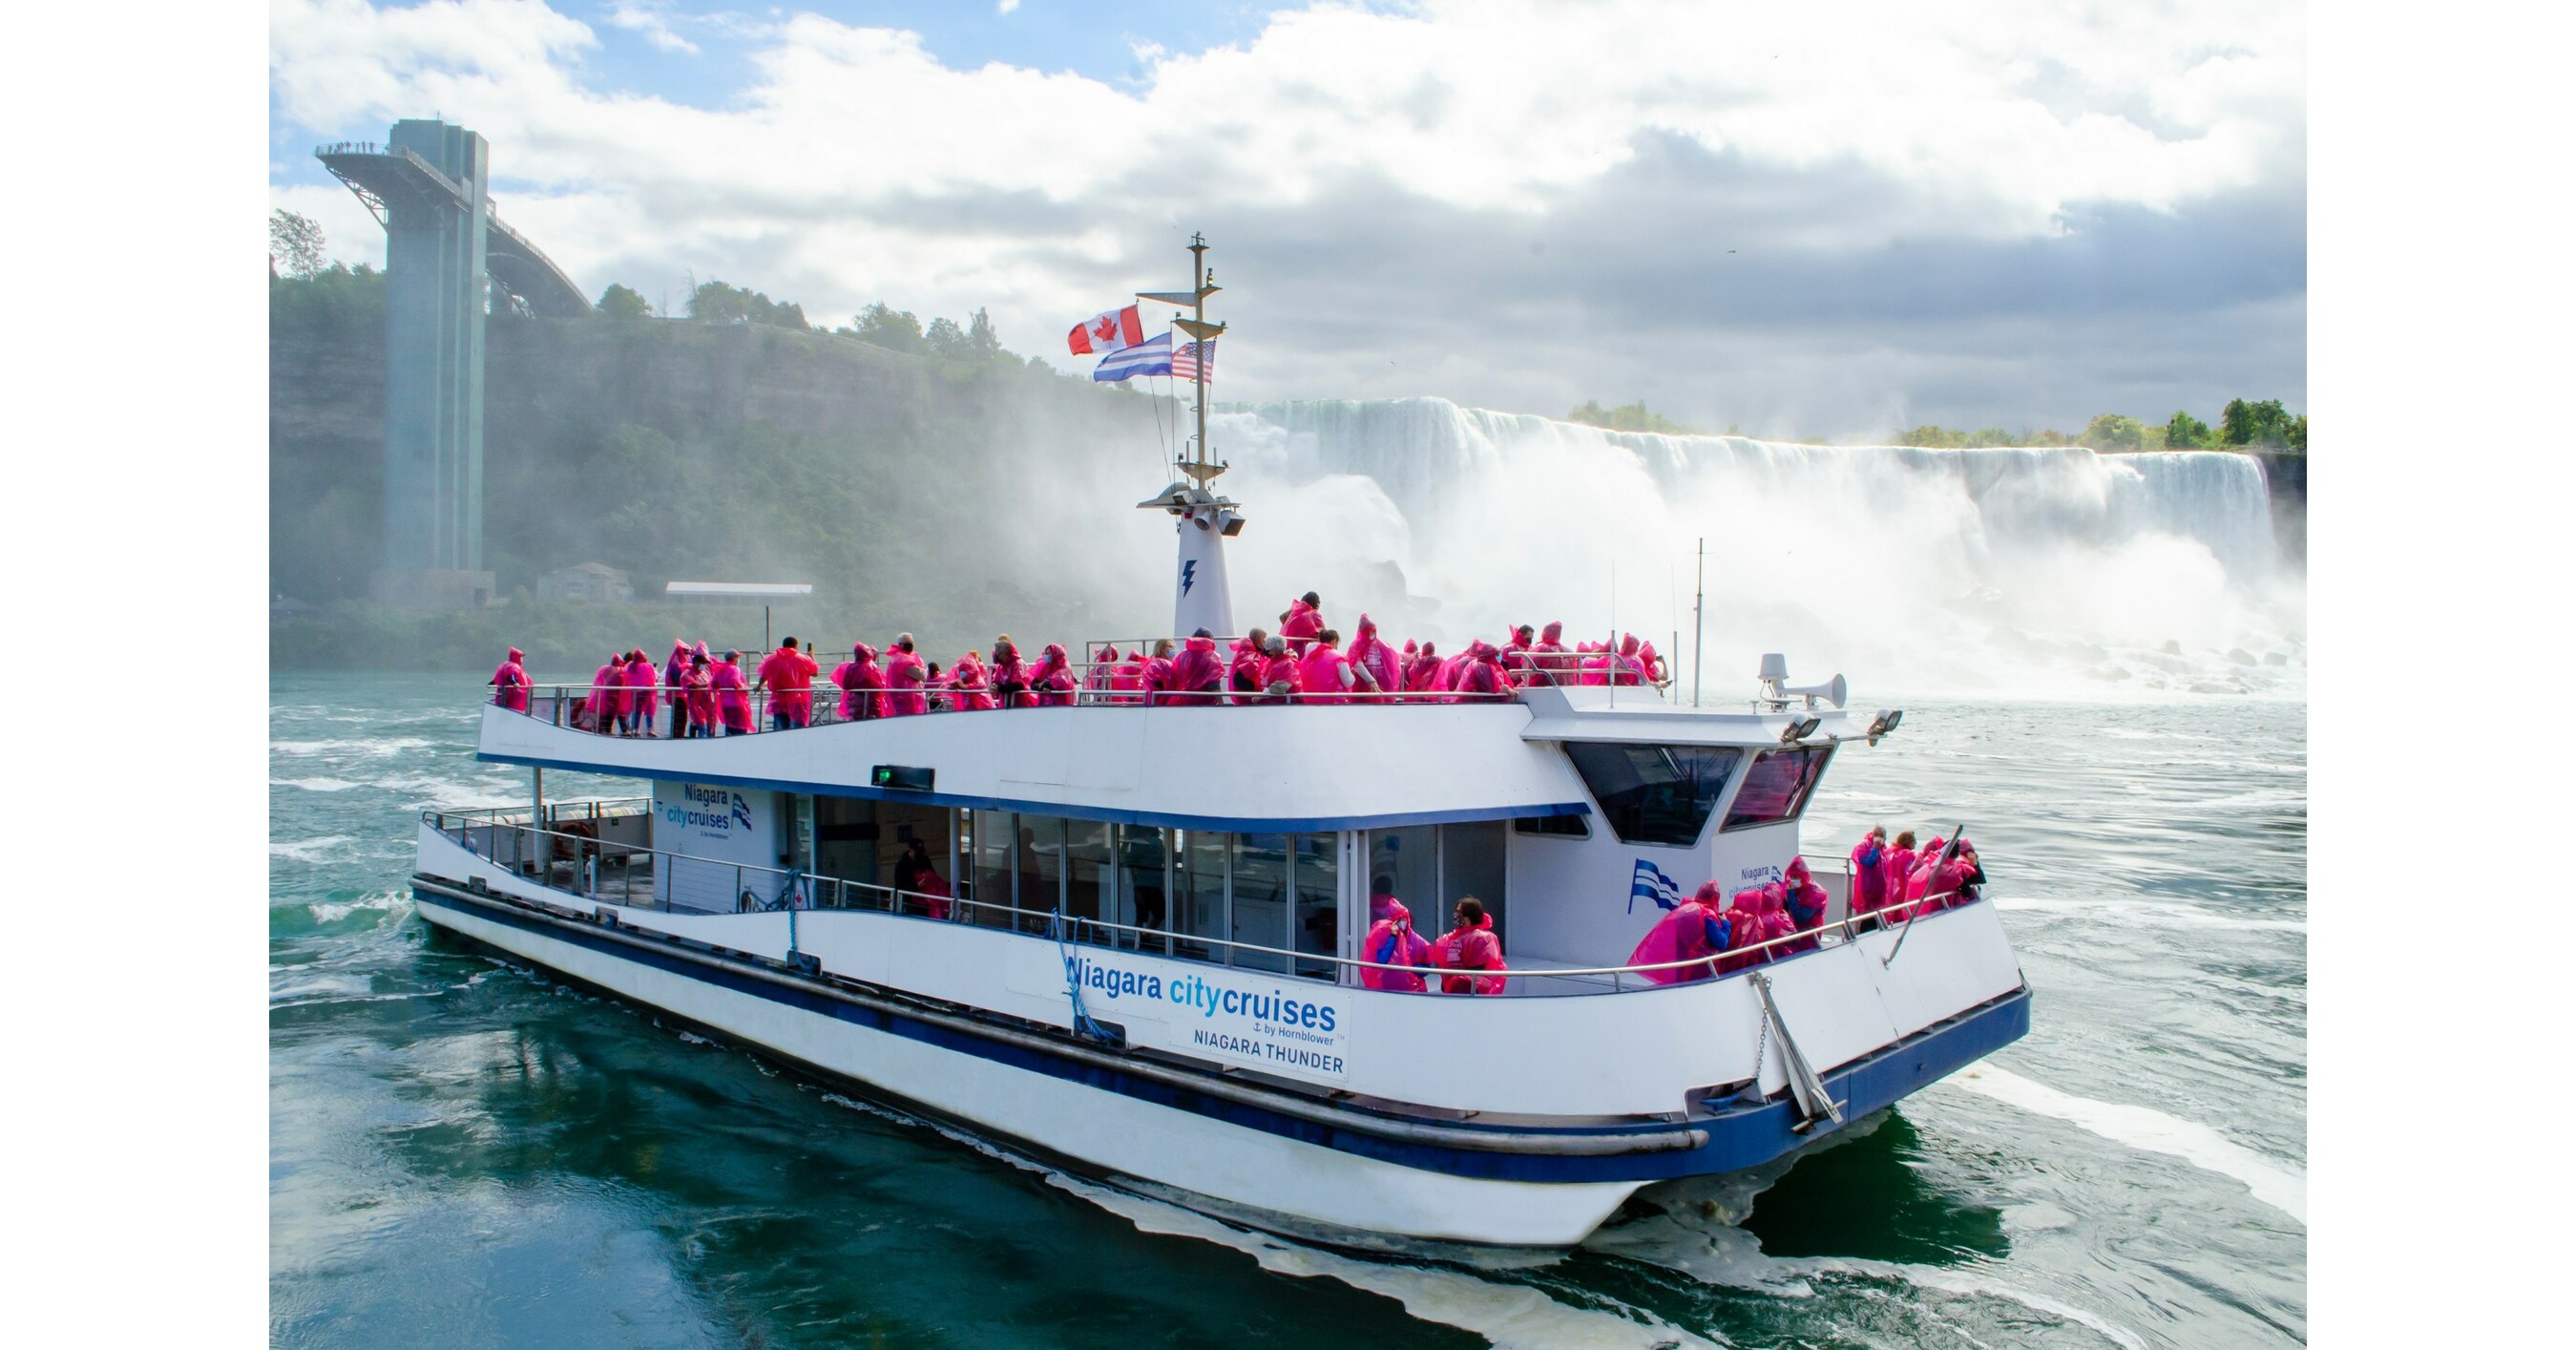 NIAGARA CITY CRUISES ANNOUNCES 2023 SEASON WITH ITS EARLIEST OPENING EVER OF TOURS TO THE ICONIC FALLS